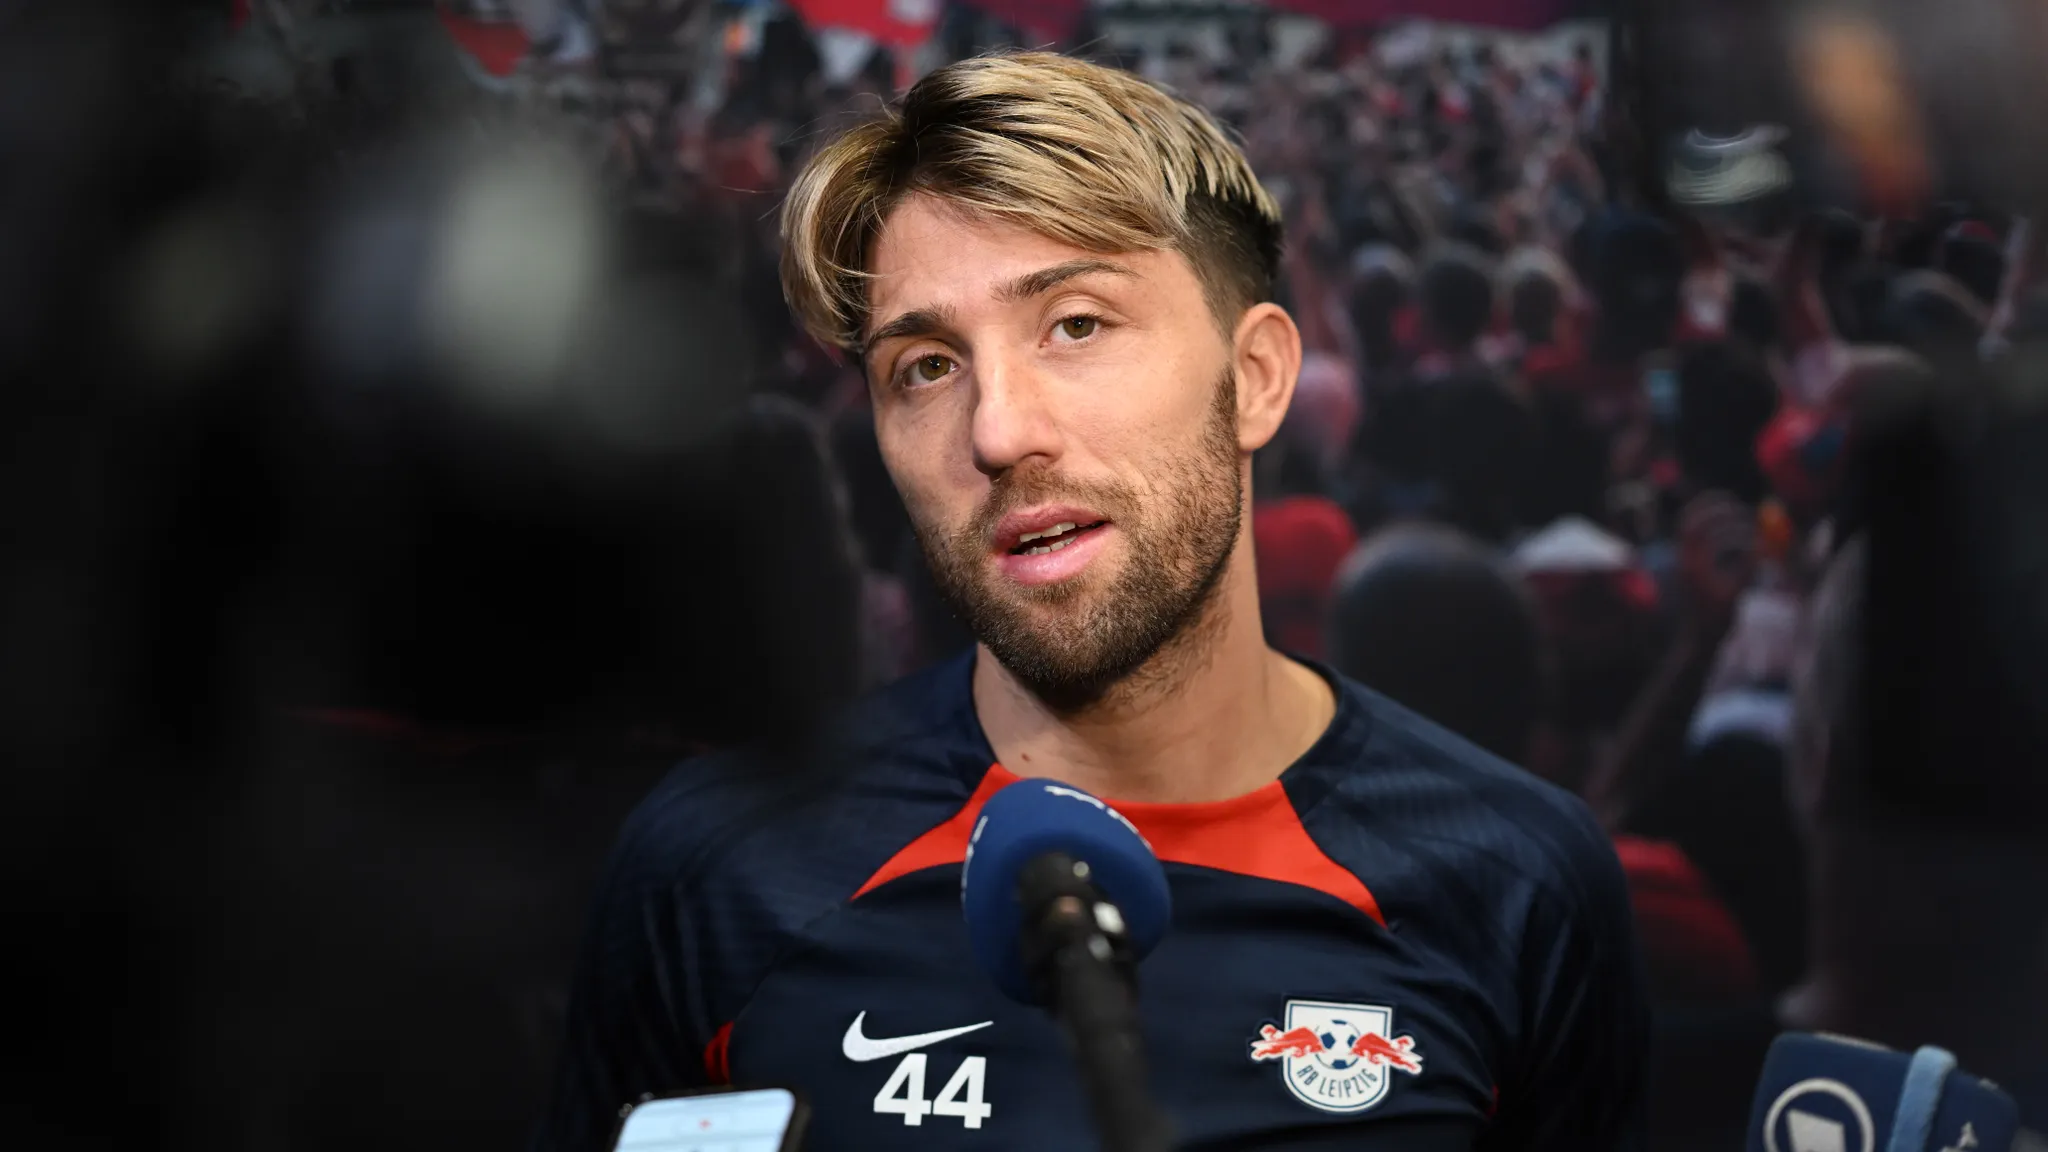 An interview with RB Leipzig's Kevin Kampl